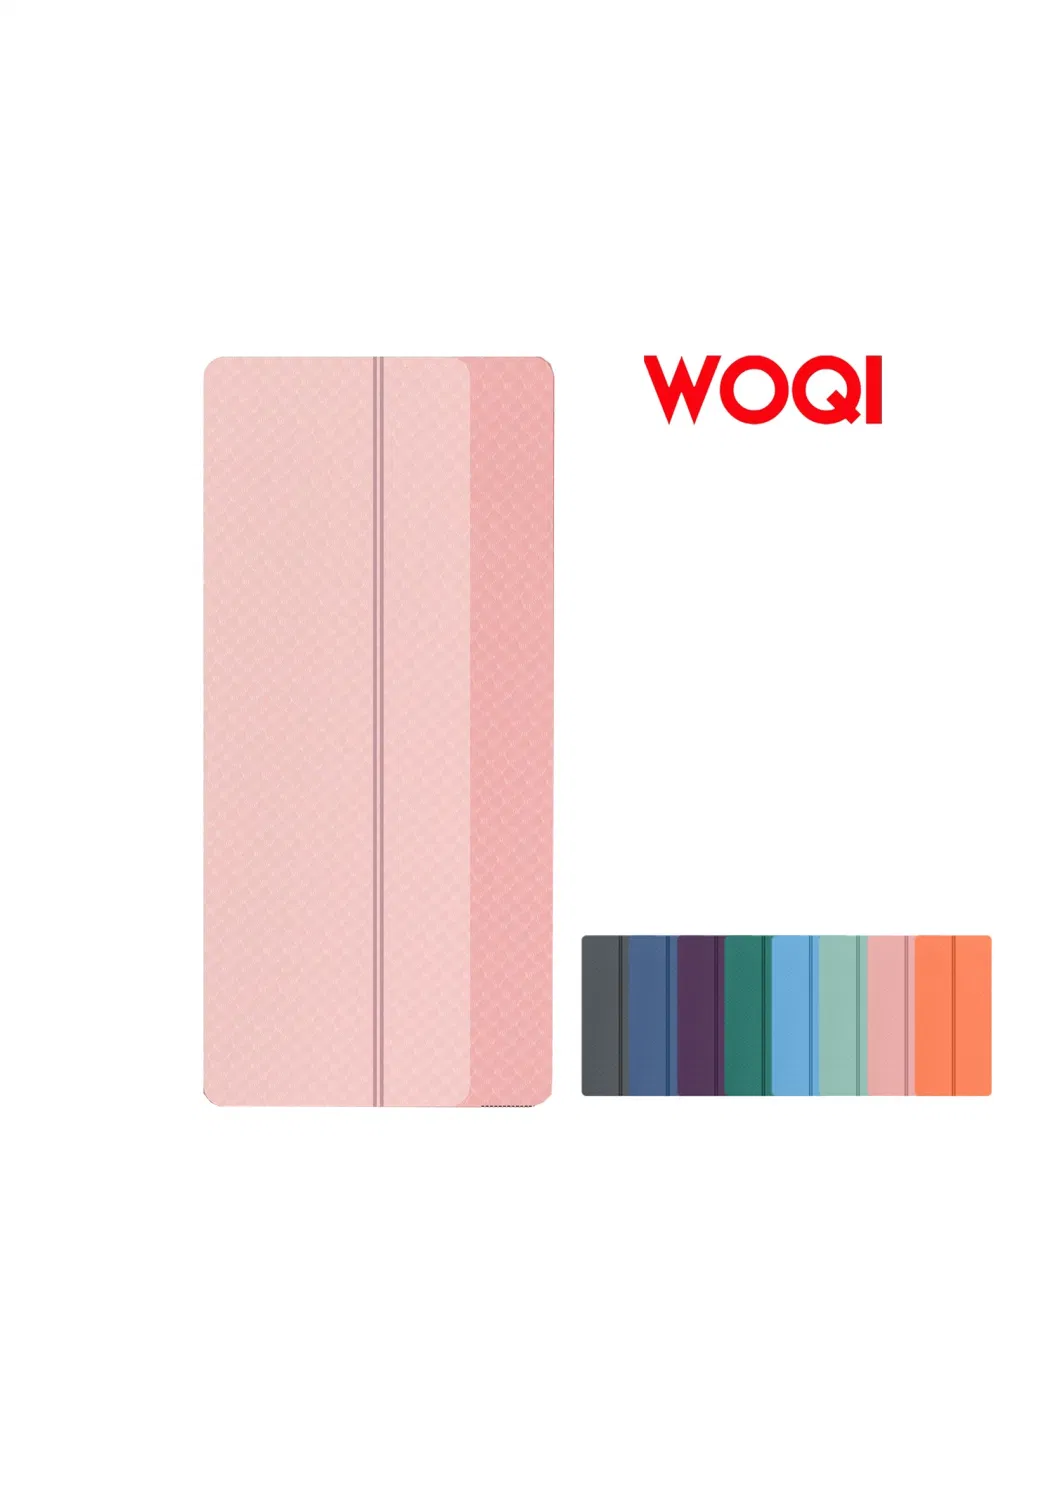 Woqi Large Sports Mat, Suitable for Fitness, Yoga, Pilates, Floor Exercise